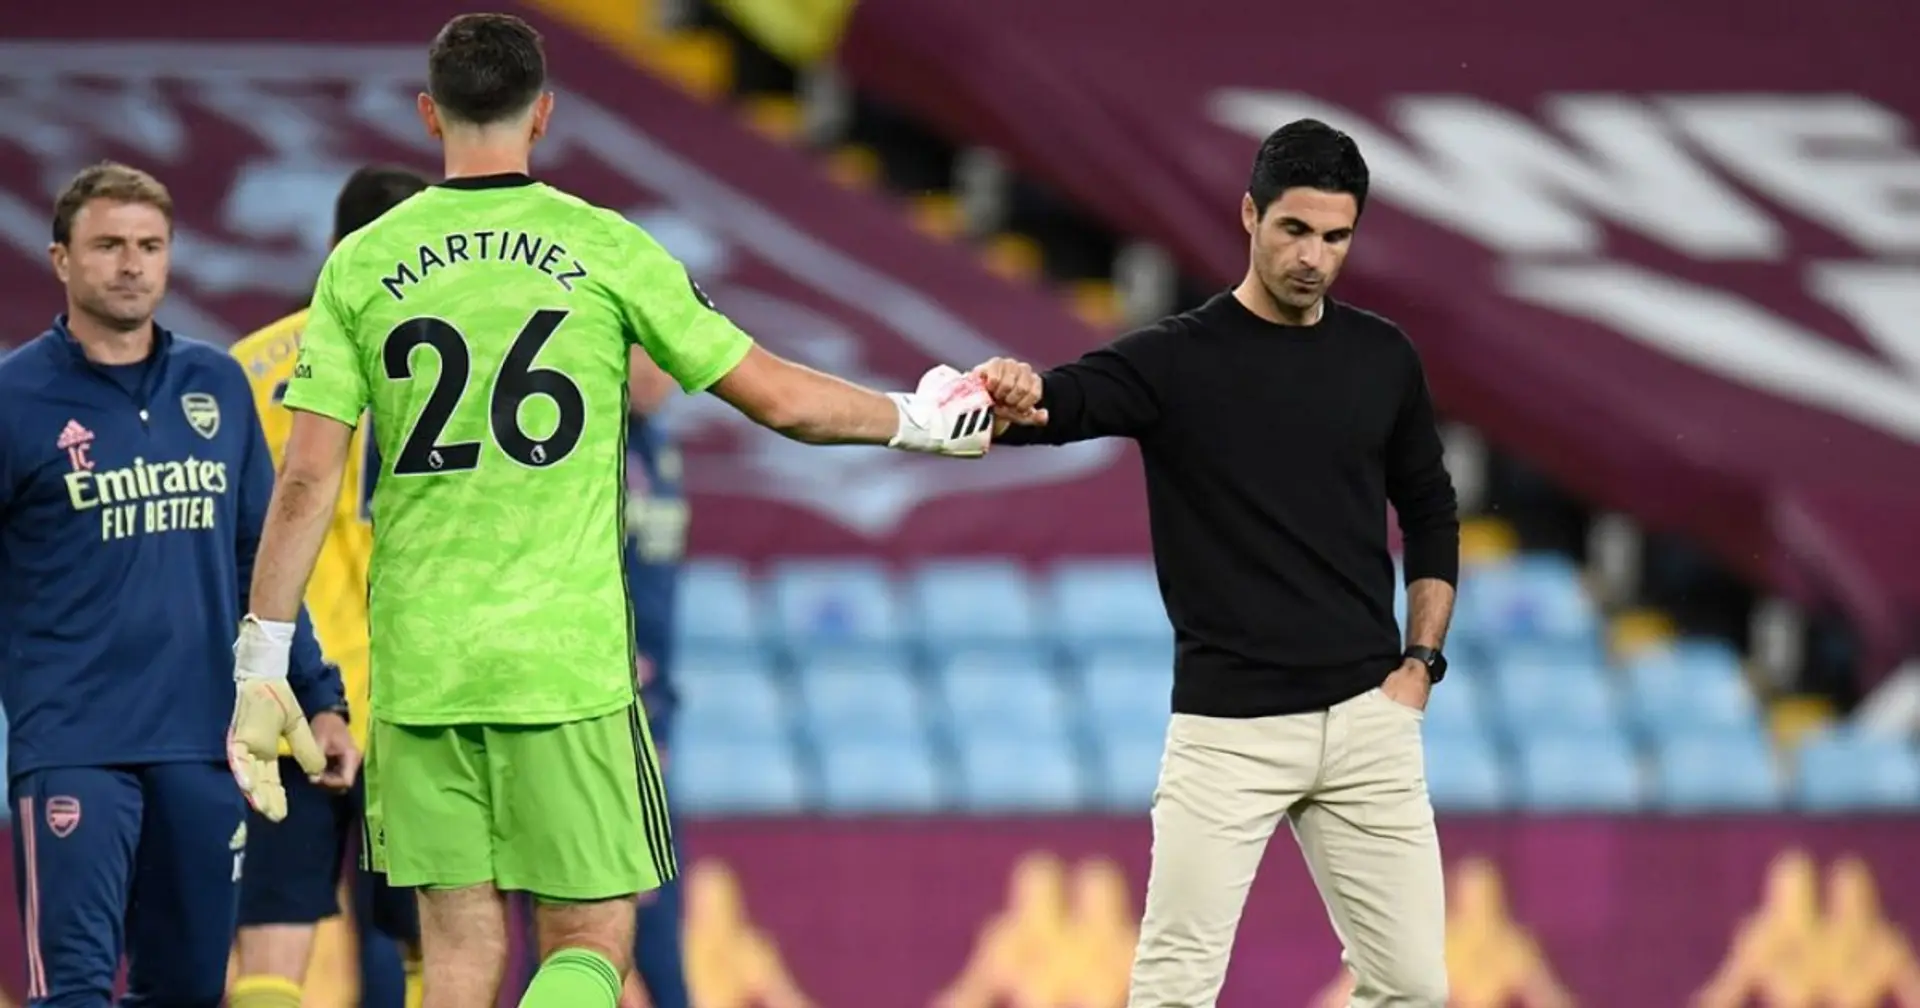 'When our goalkeeper makes an error, it's going to come up': Arteta has no regrets over Martinez sale